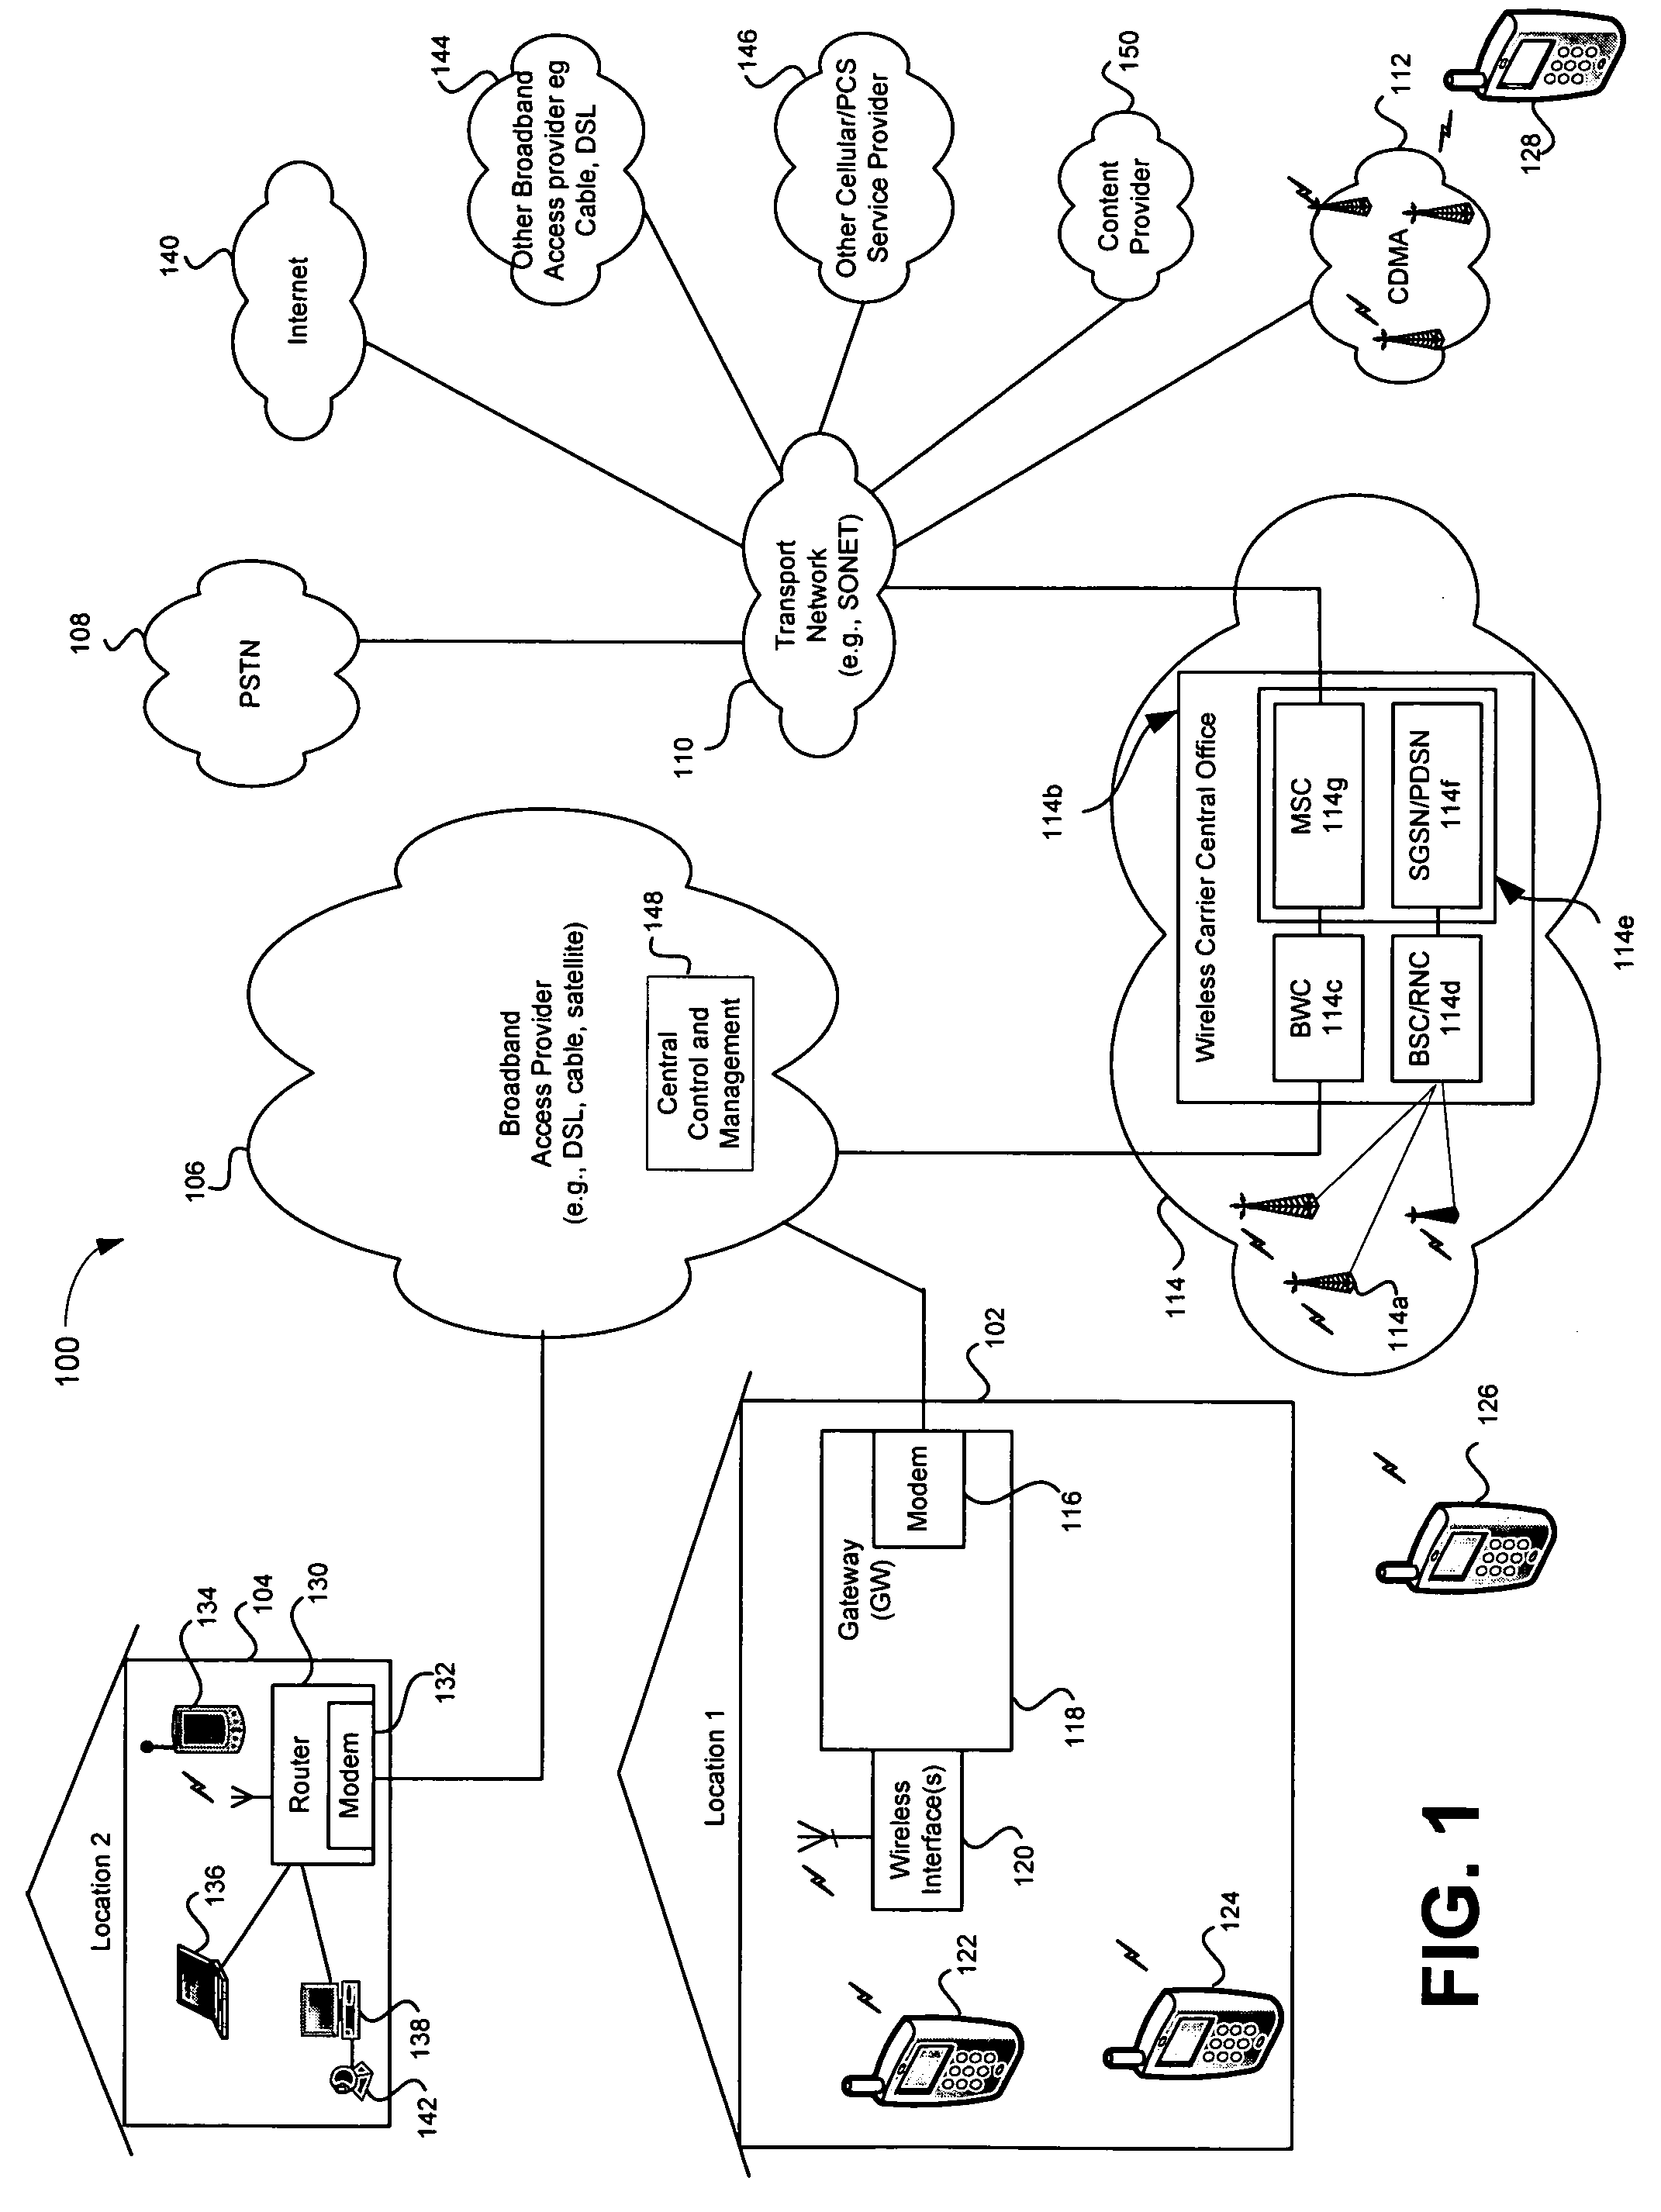 Method and system for extended network access notification via a broadband access gateway